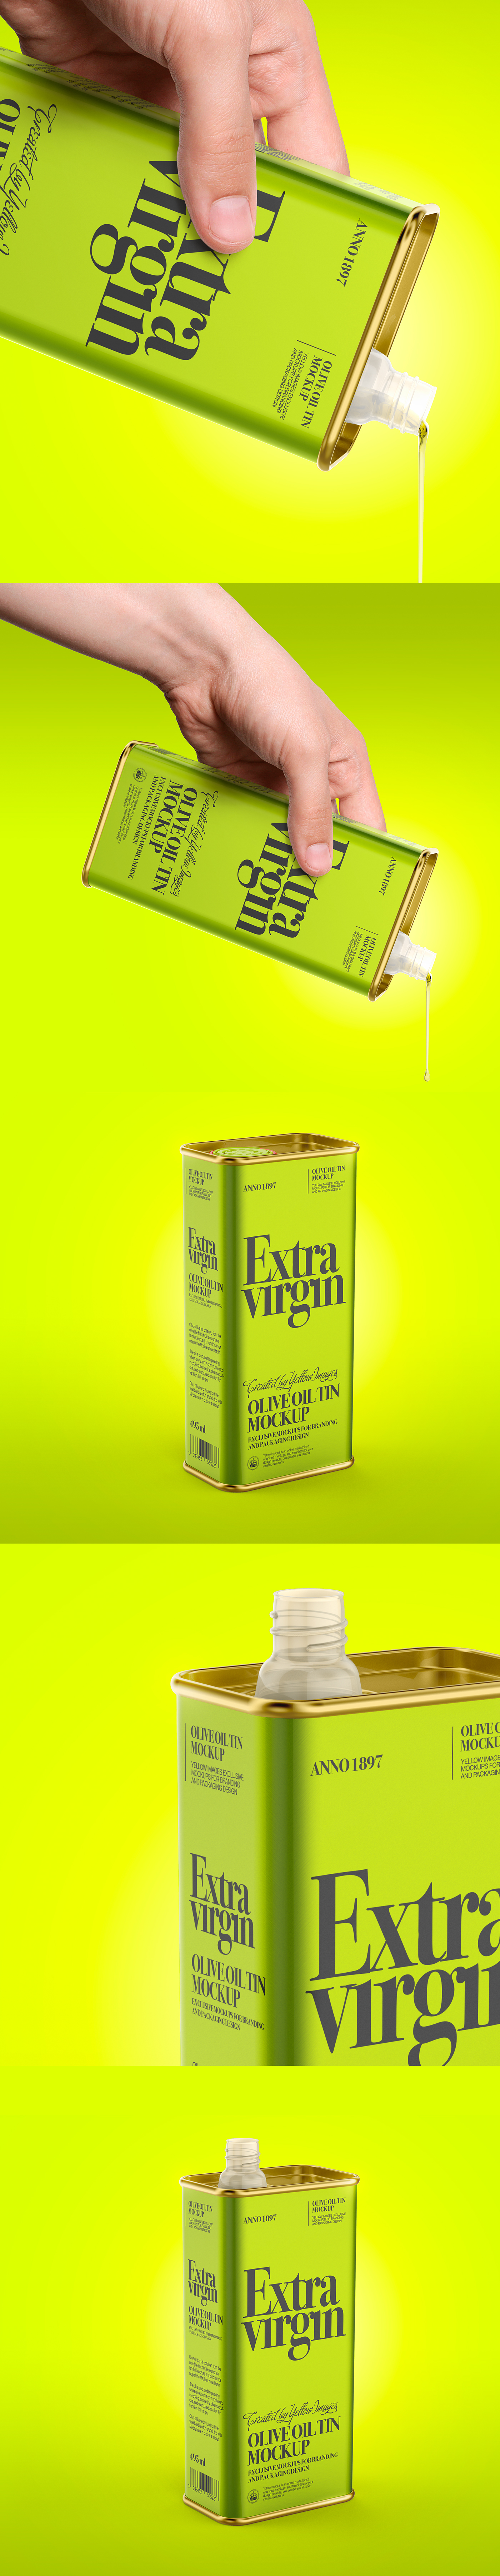 Download Olive Oil Tin Can Mockup in Packaging Mockups on Yellow ...